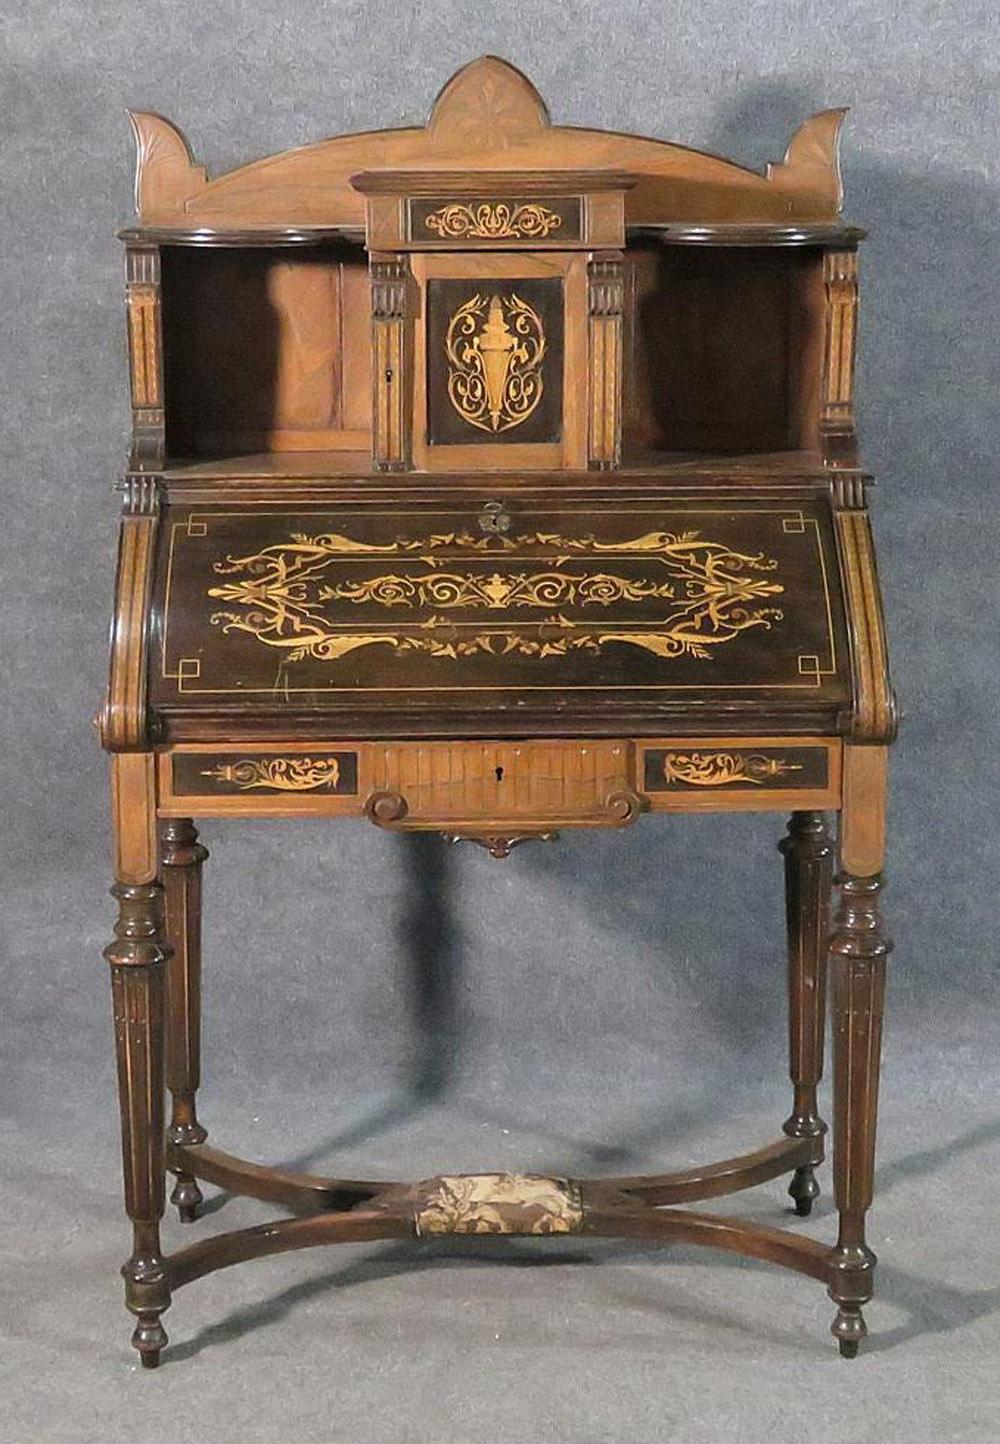 This is a beautiful and rare Herter Brothers secretary desk. The desk measures 56 3/4